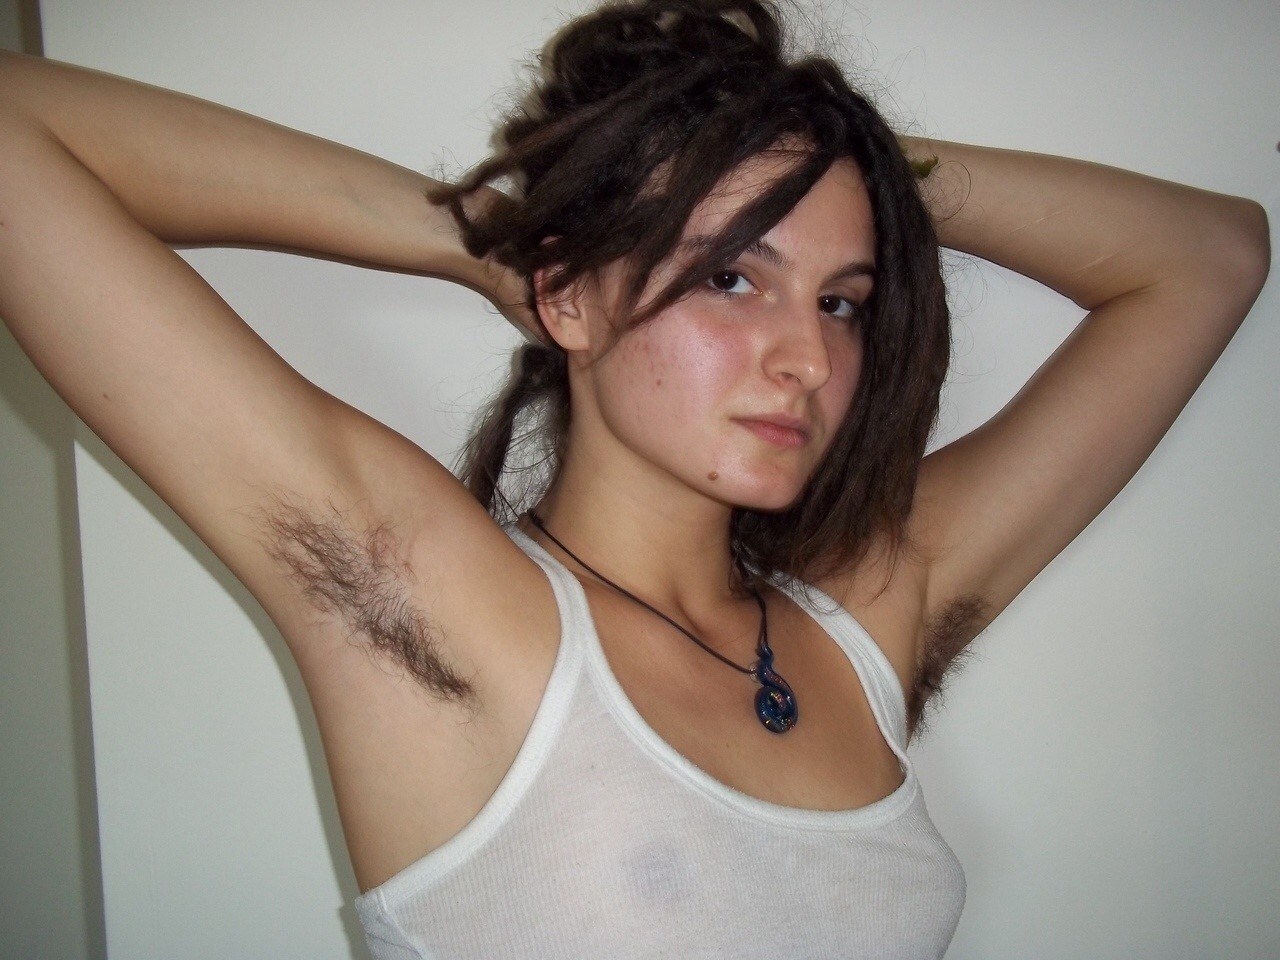 Prostitutes with Short Haircuts Unshaven (73 photos)